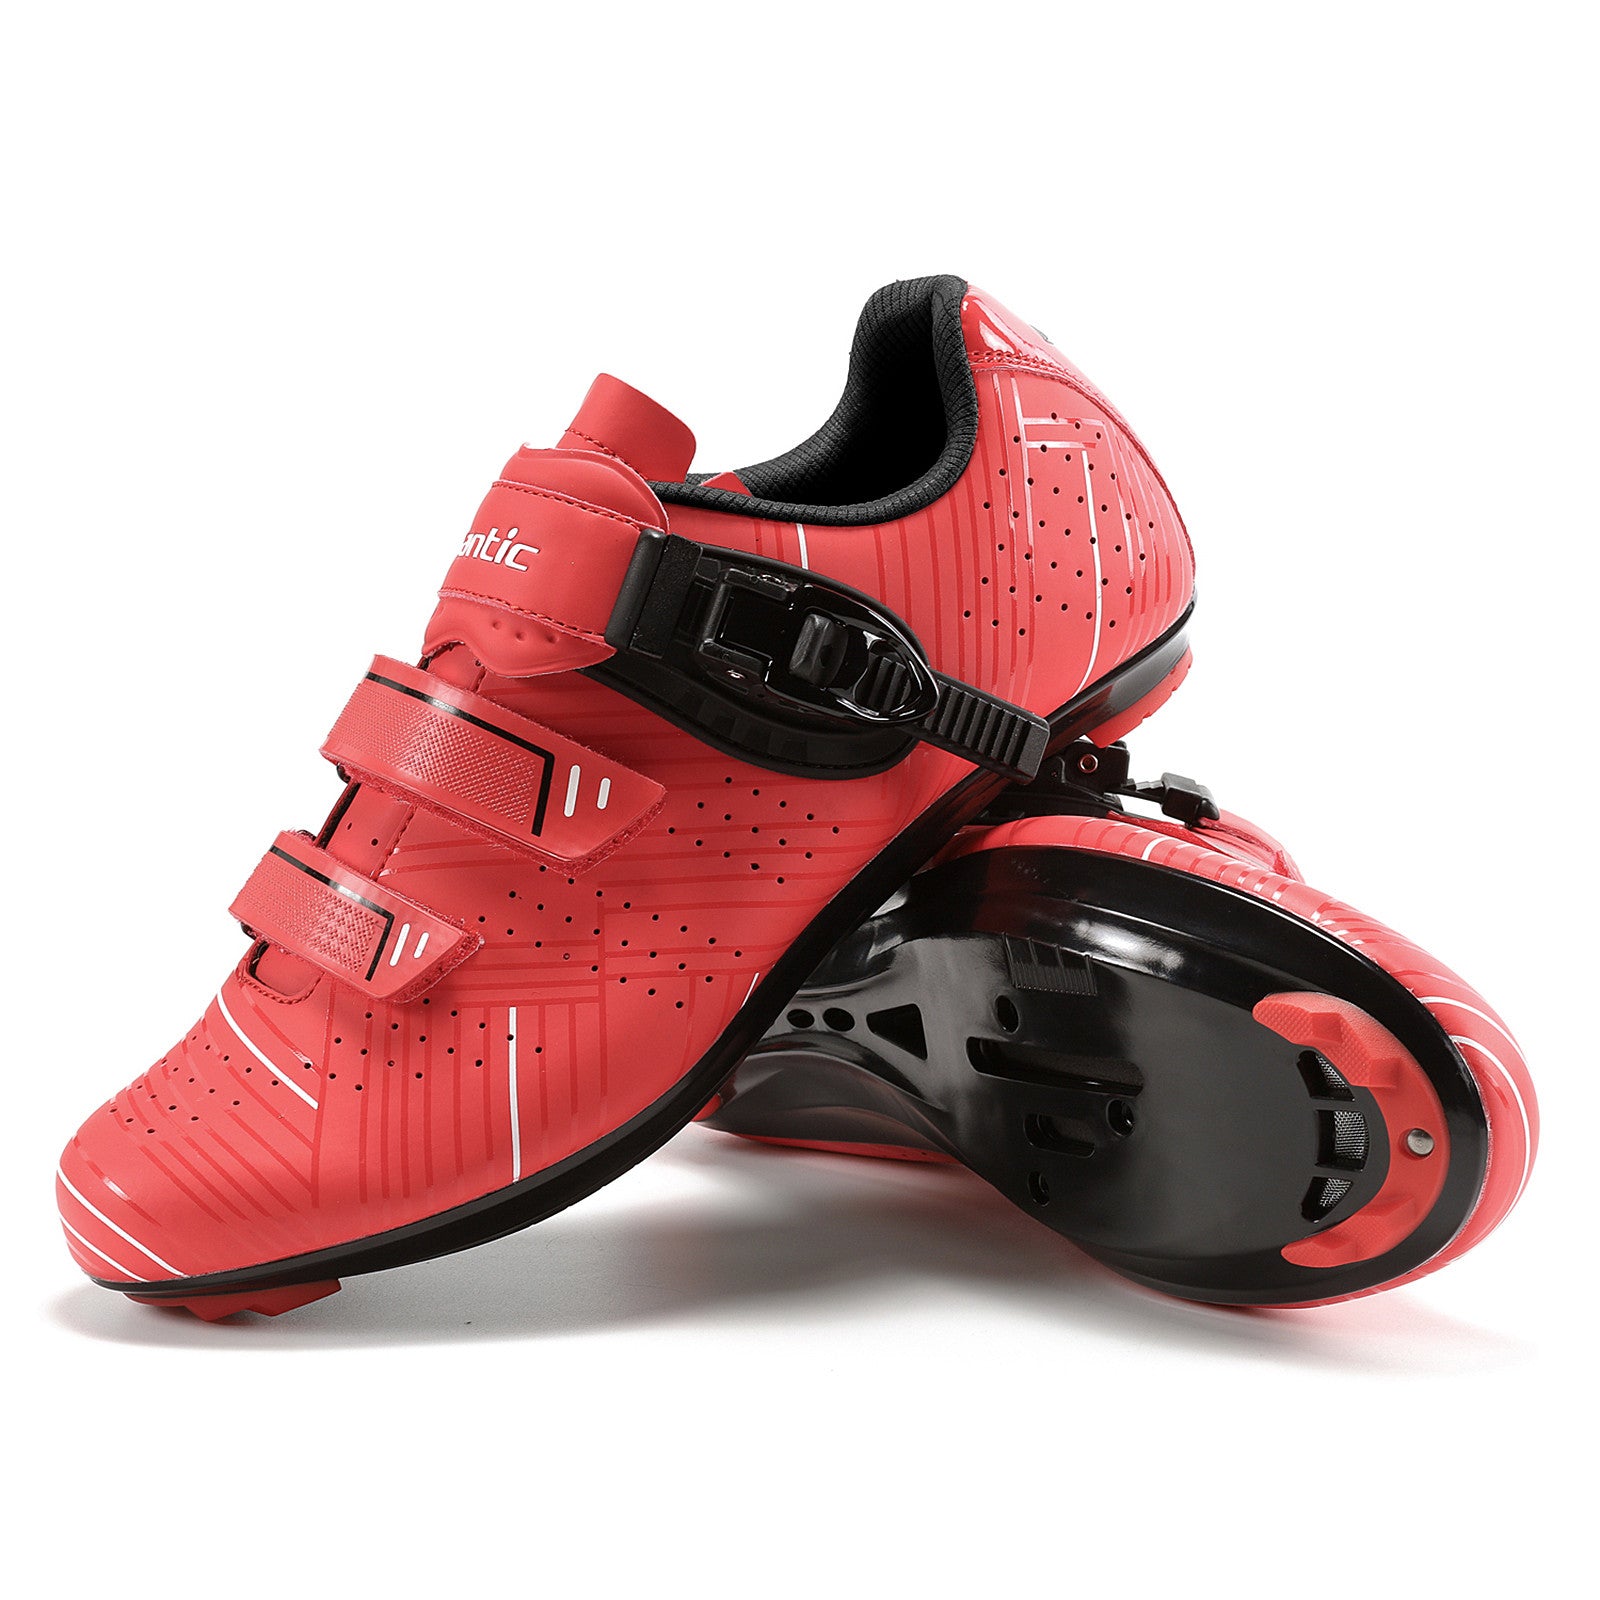 Santic Roadway Red Men and Women Road Cycling Shoes